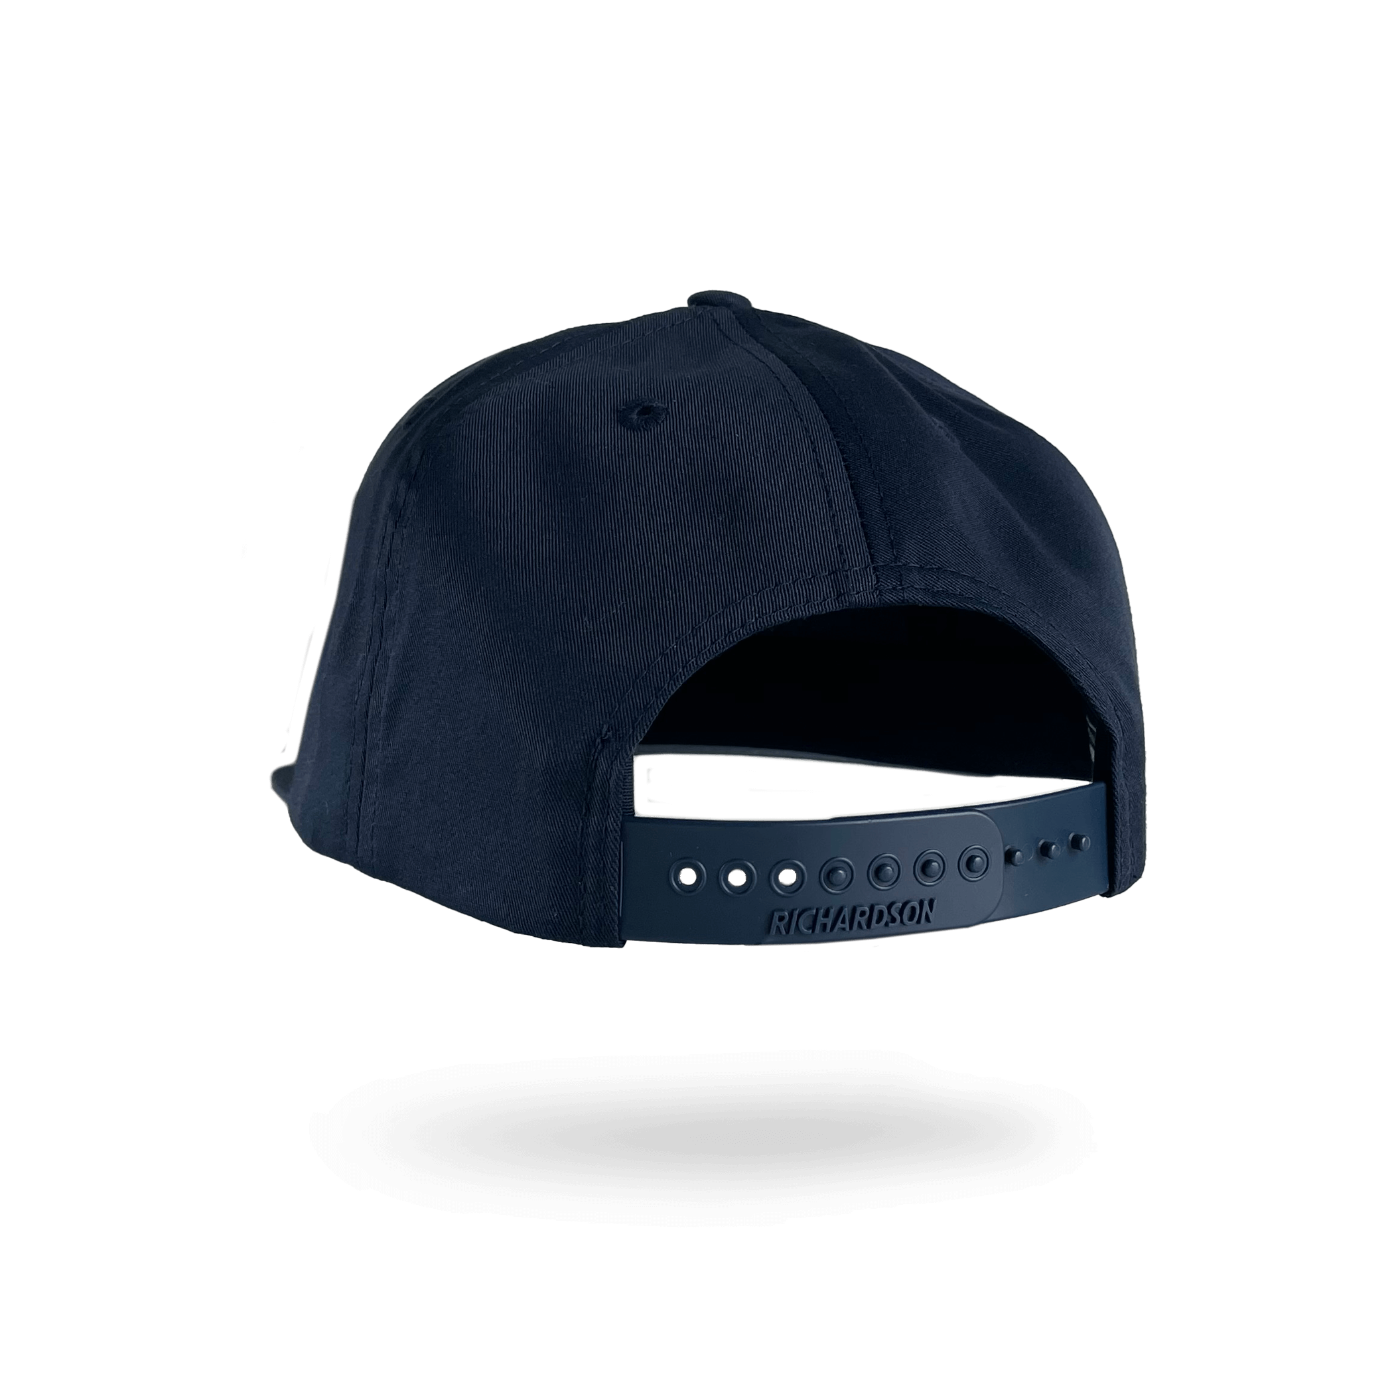 Distil embroidered hat in navy as seen from the back